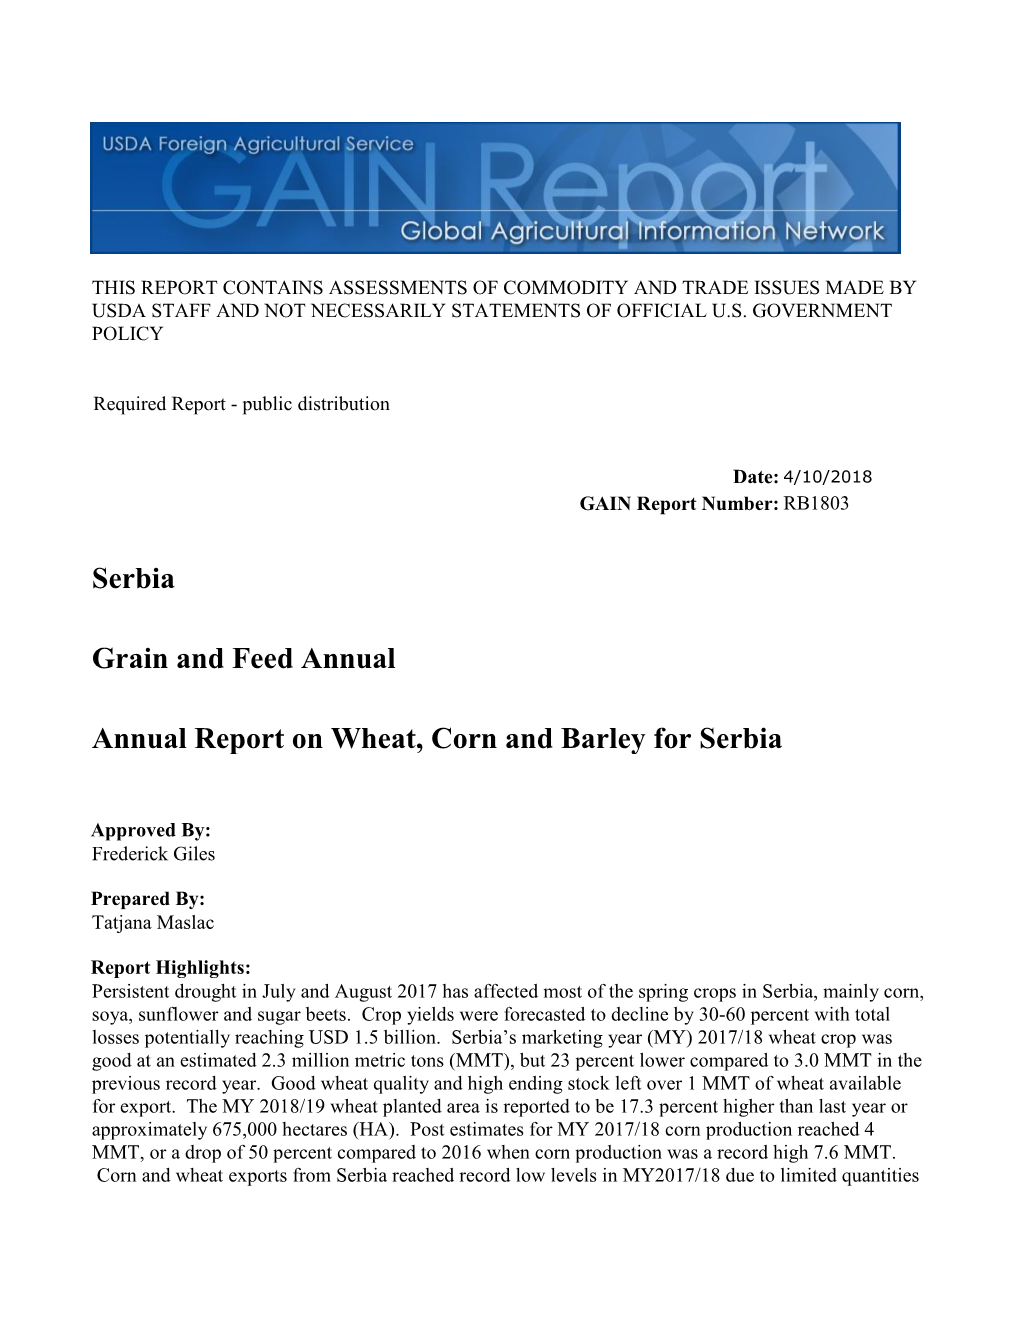 Annual Report on Wheat, Corn and Barley for Serbia Grain and Feed